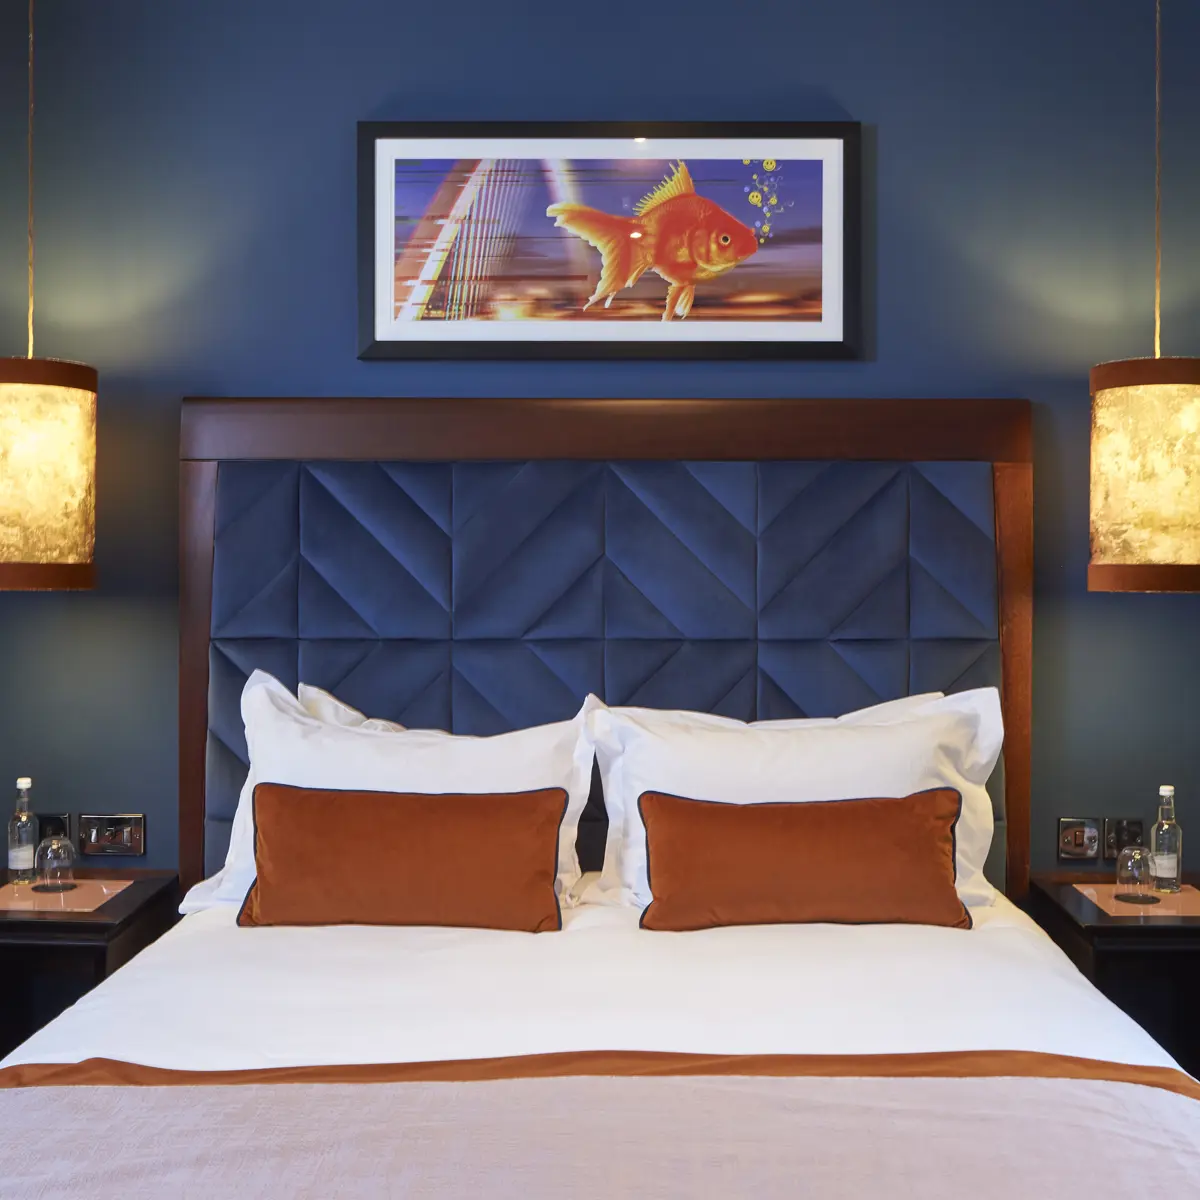 A bed featuring a stylish blue headboard adorned with vibrant orange pillows.